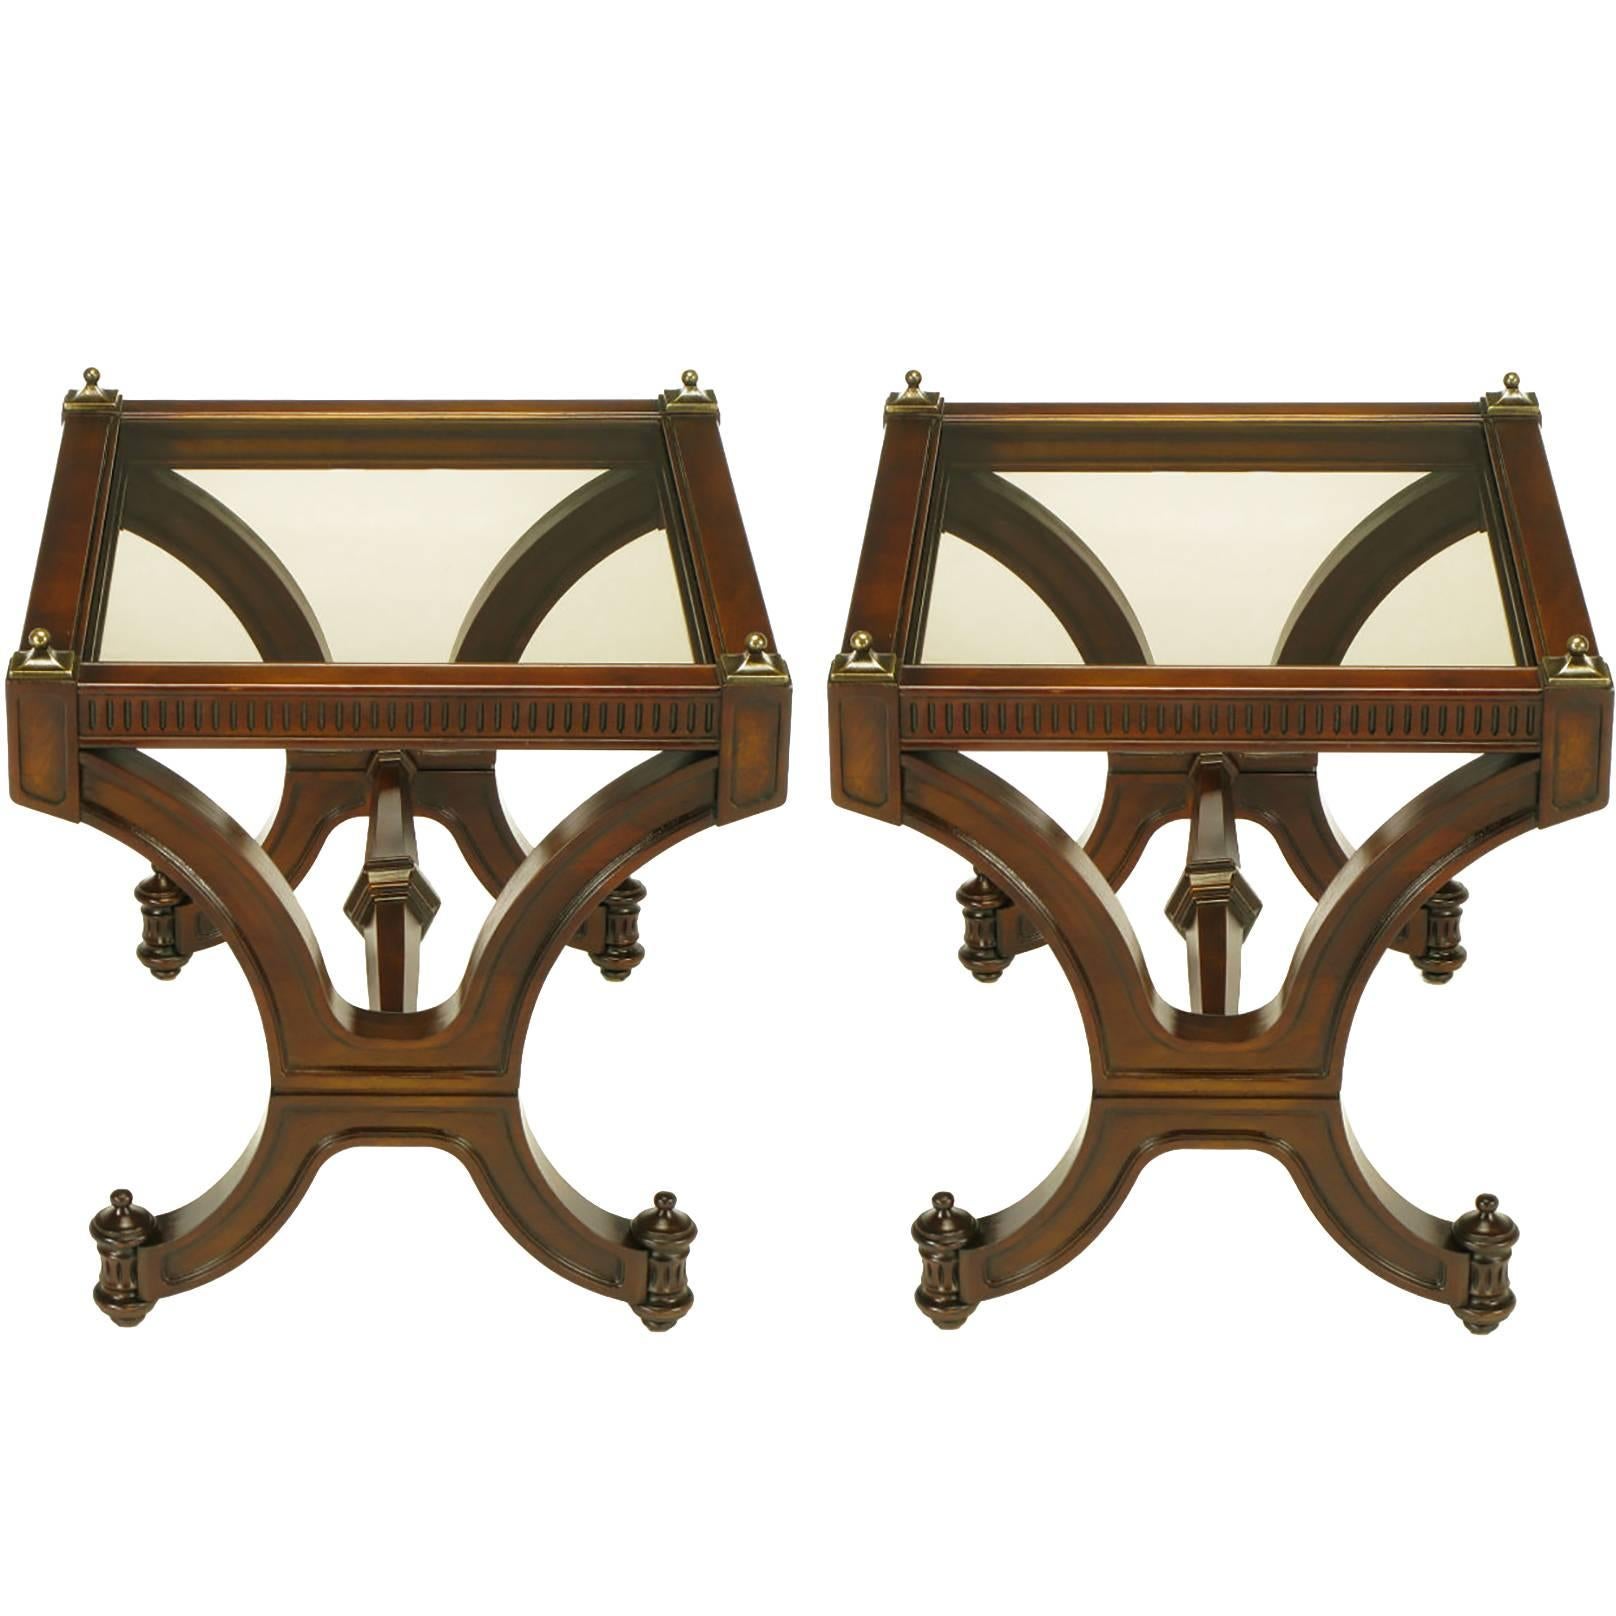 Pair of Mahogany and Glass Empire Style End Tables with Brass Finials For Sale